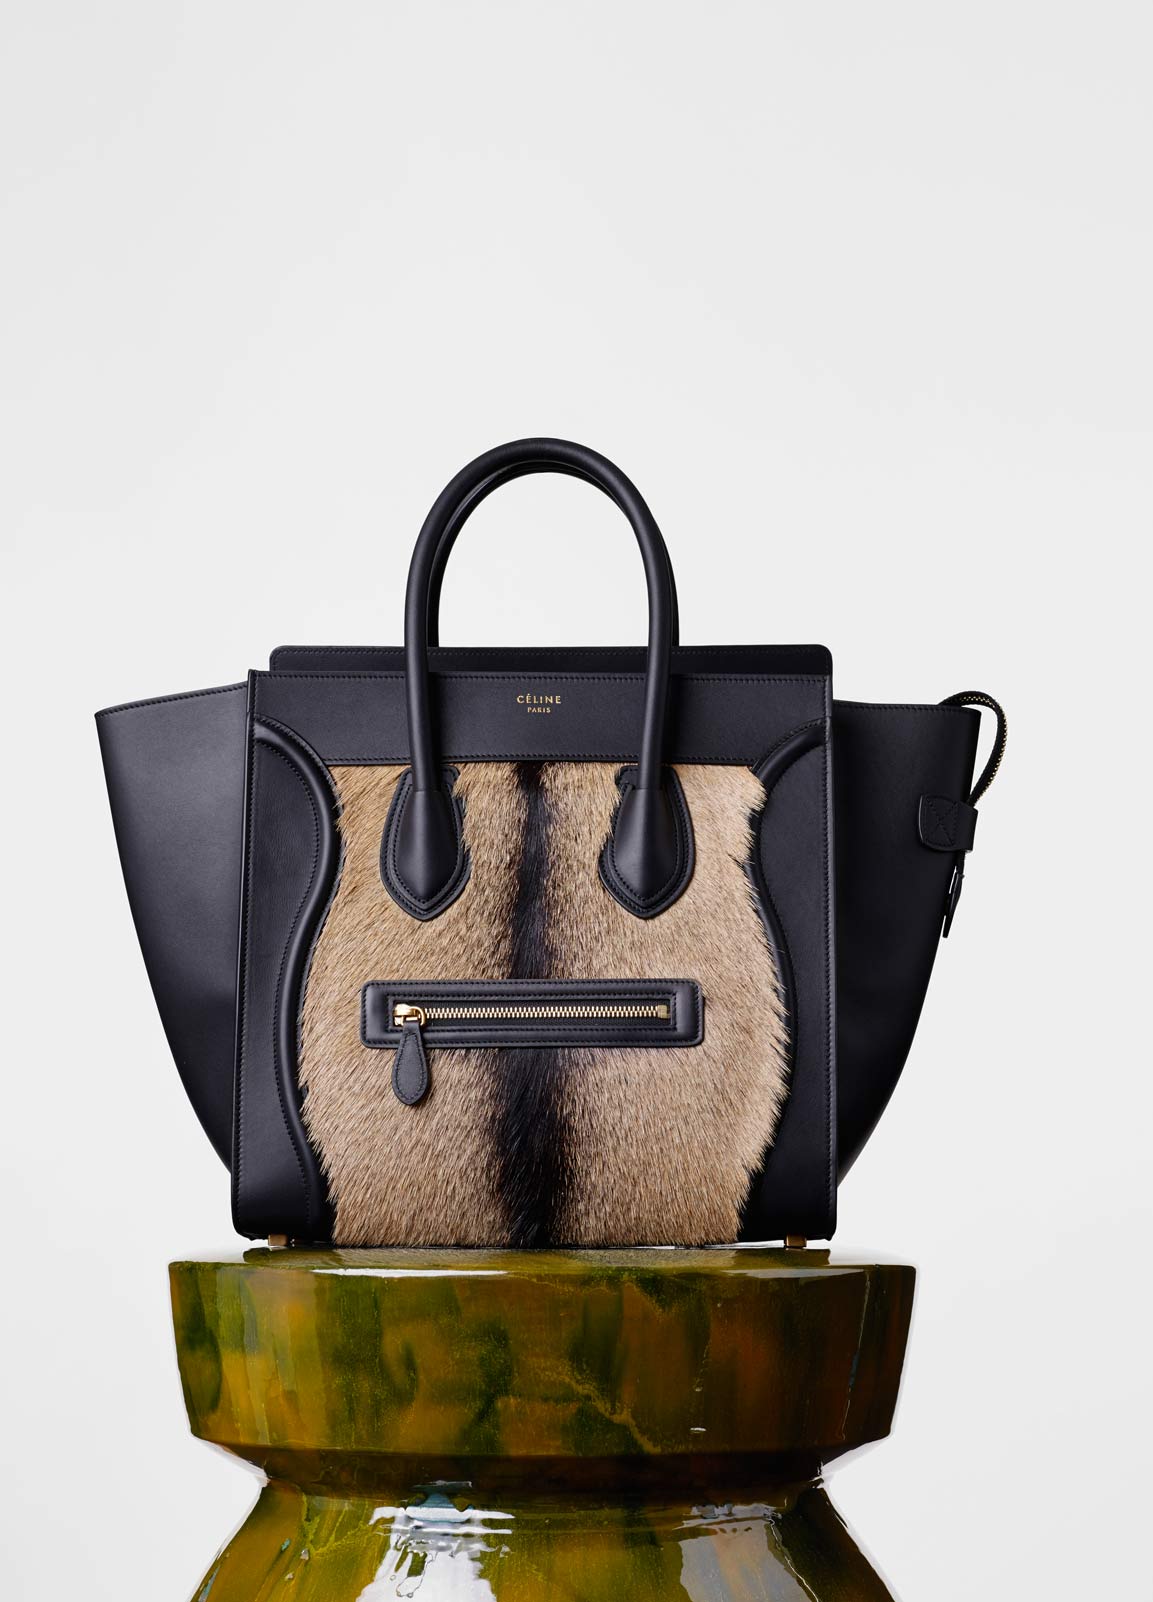 Celine Winter 2015 Bag Collection Featuring Subtropical Shades and ...